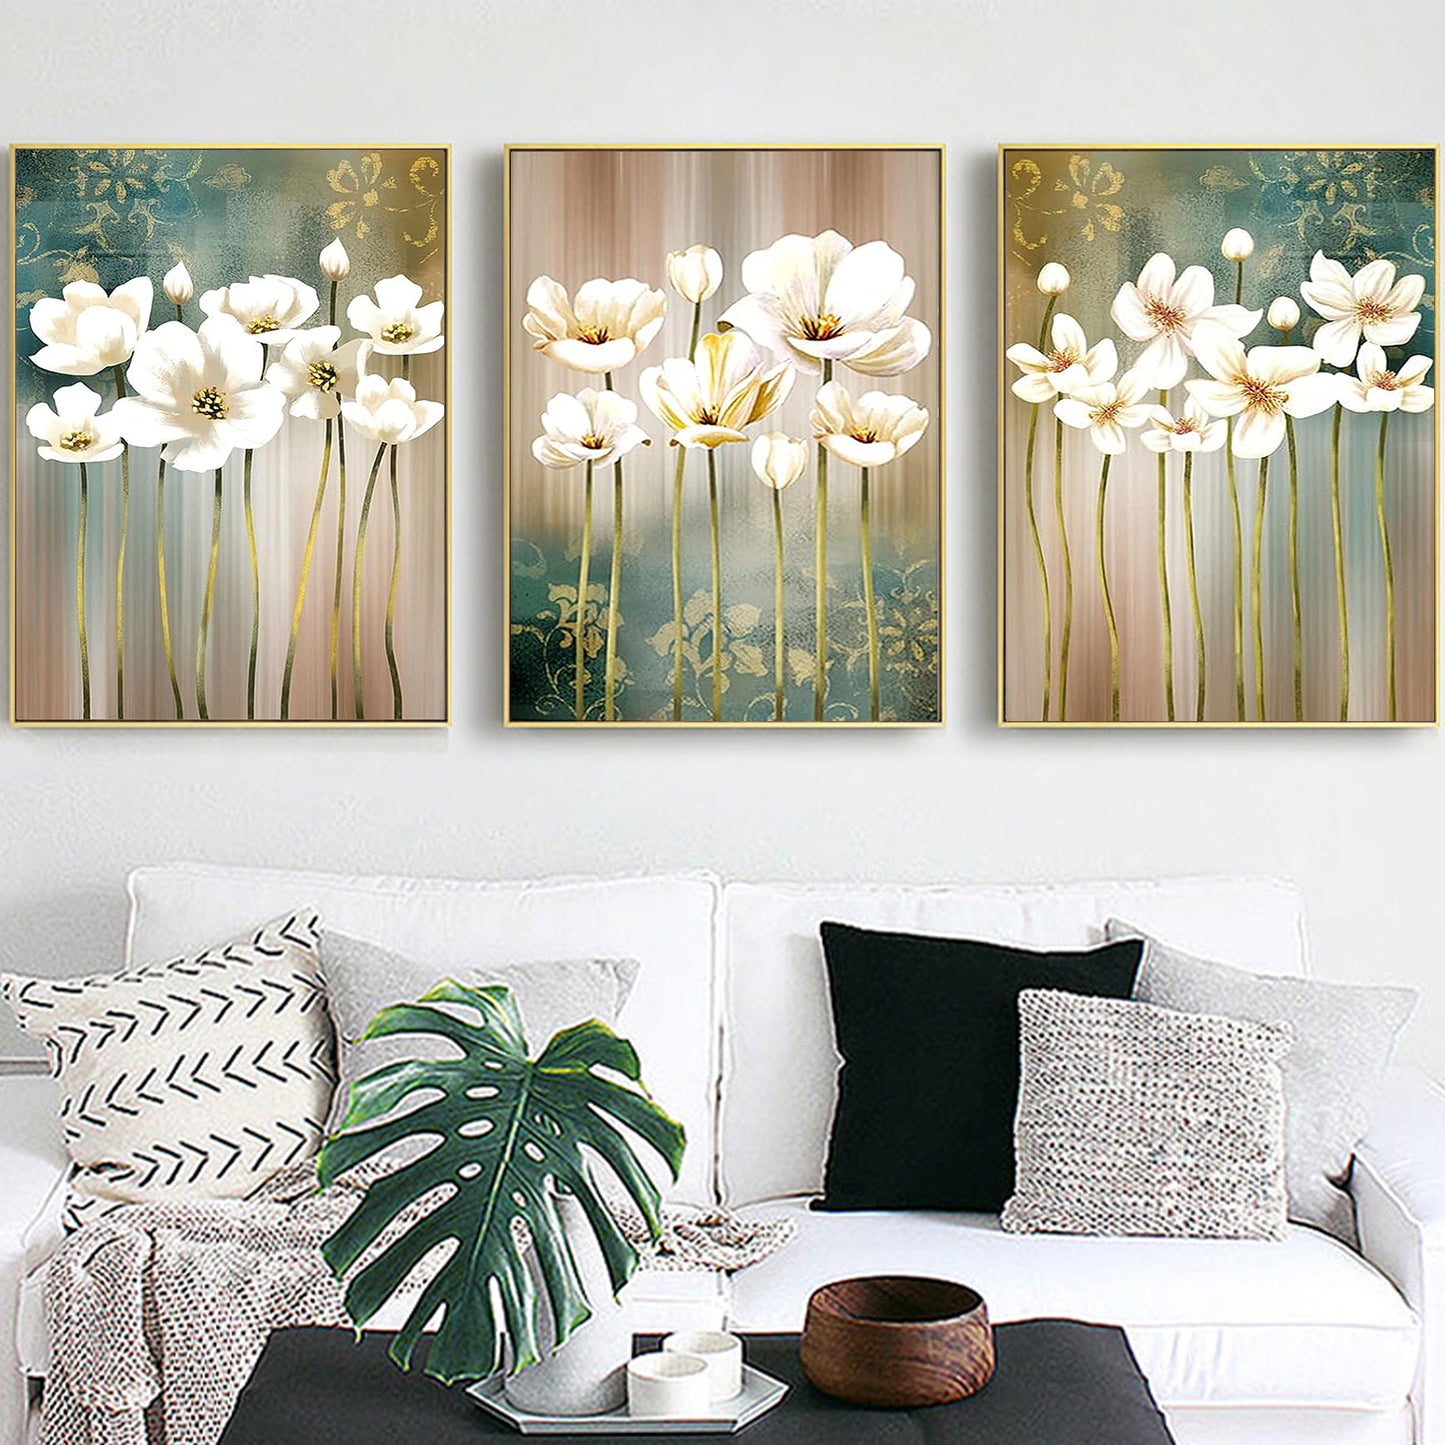 Louts Flower - Painting with Numbers -30x40cm-3pcs/set